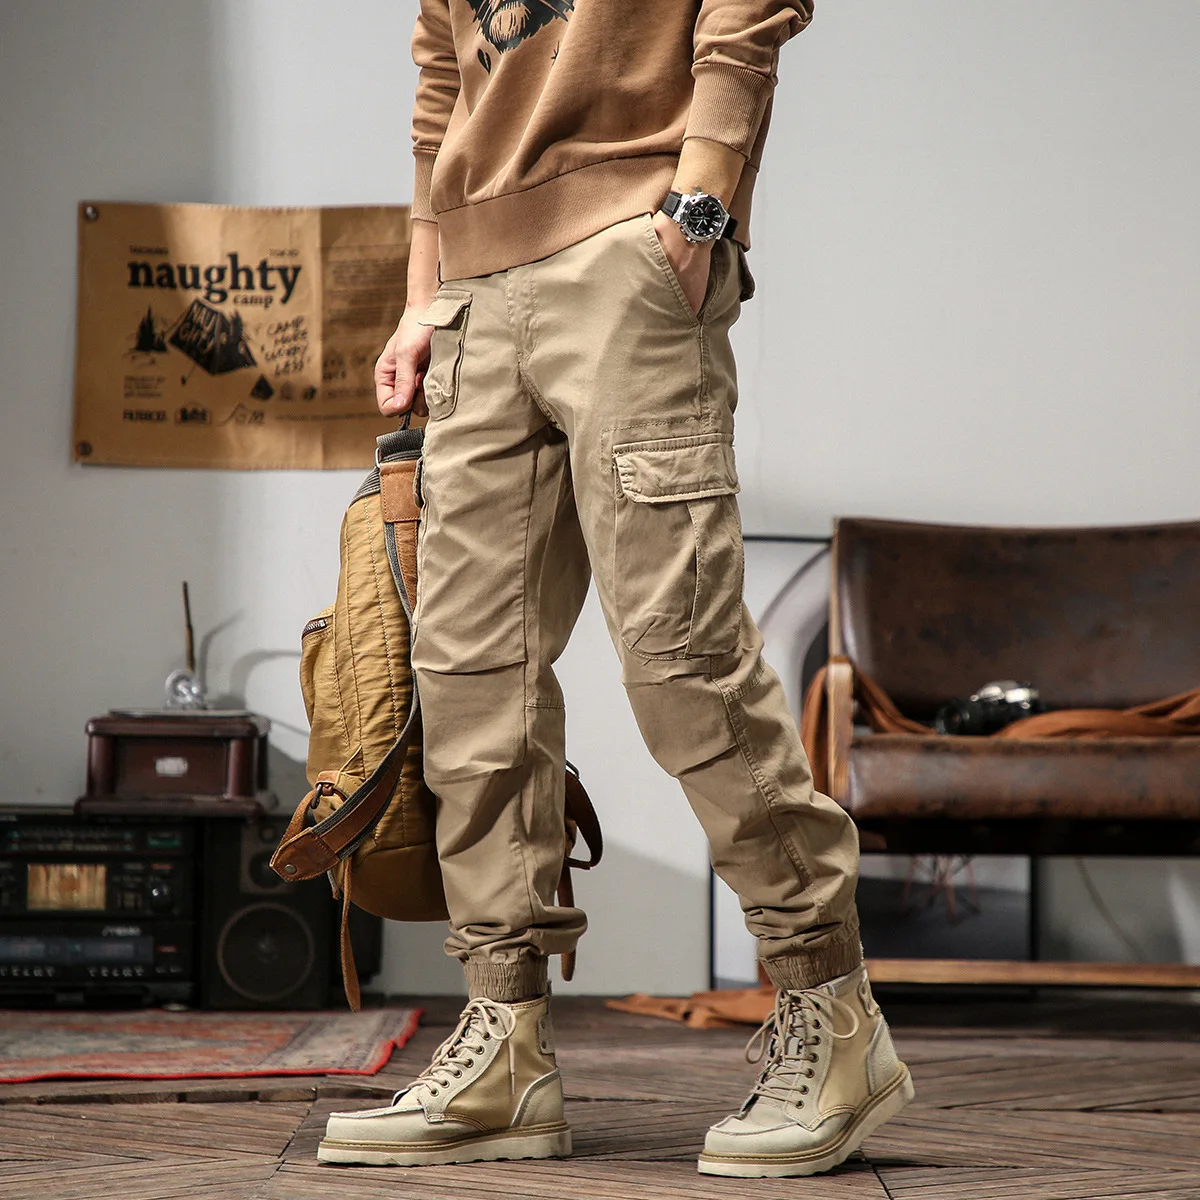 Elmsk Men's Spring and Autumn New Vintage Khaki Workwear Pants with Loose Feet and Large Pockets Trendy Heavyweight Casual Sport